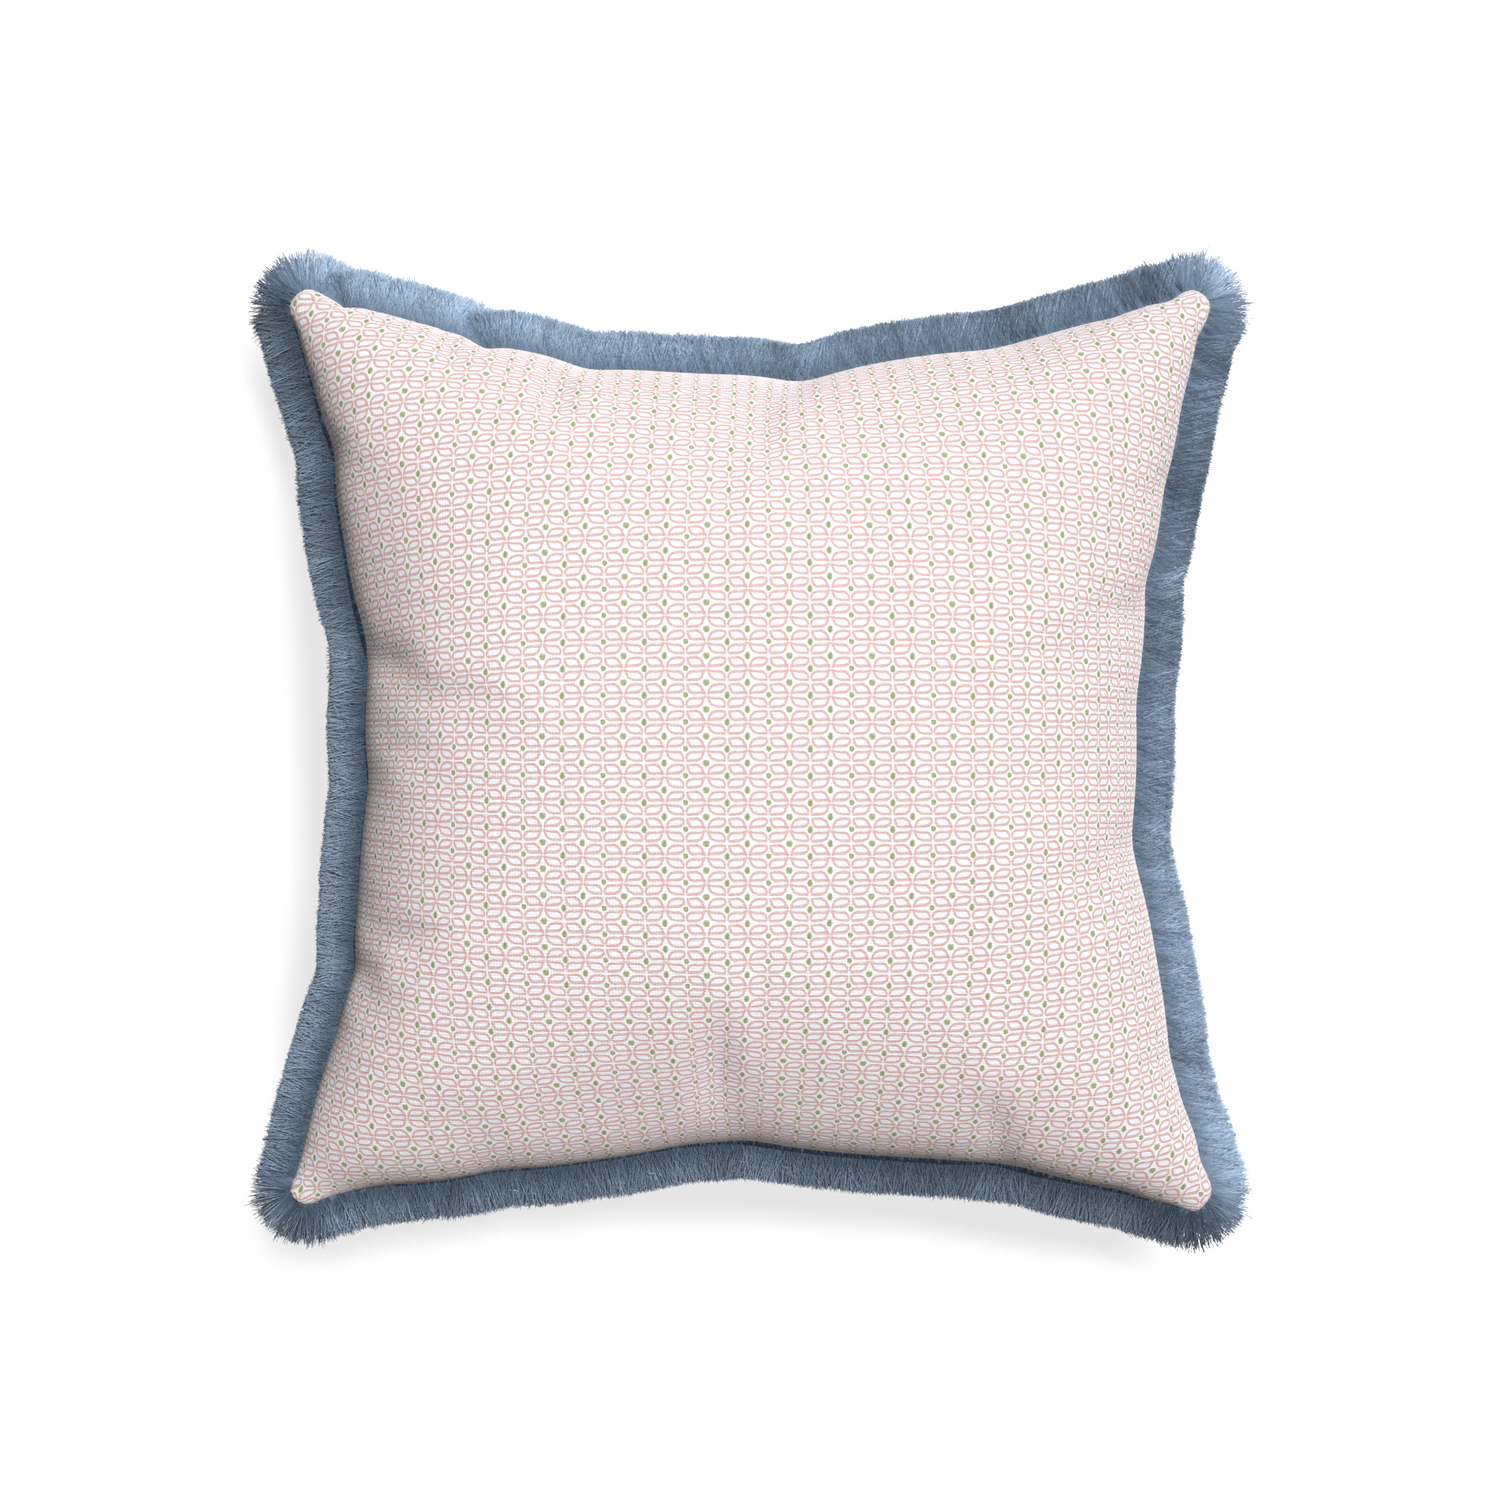 20-square loomi pink custom pillow with sky fringe on white background